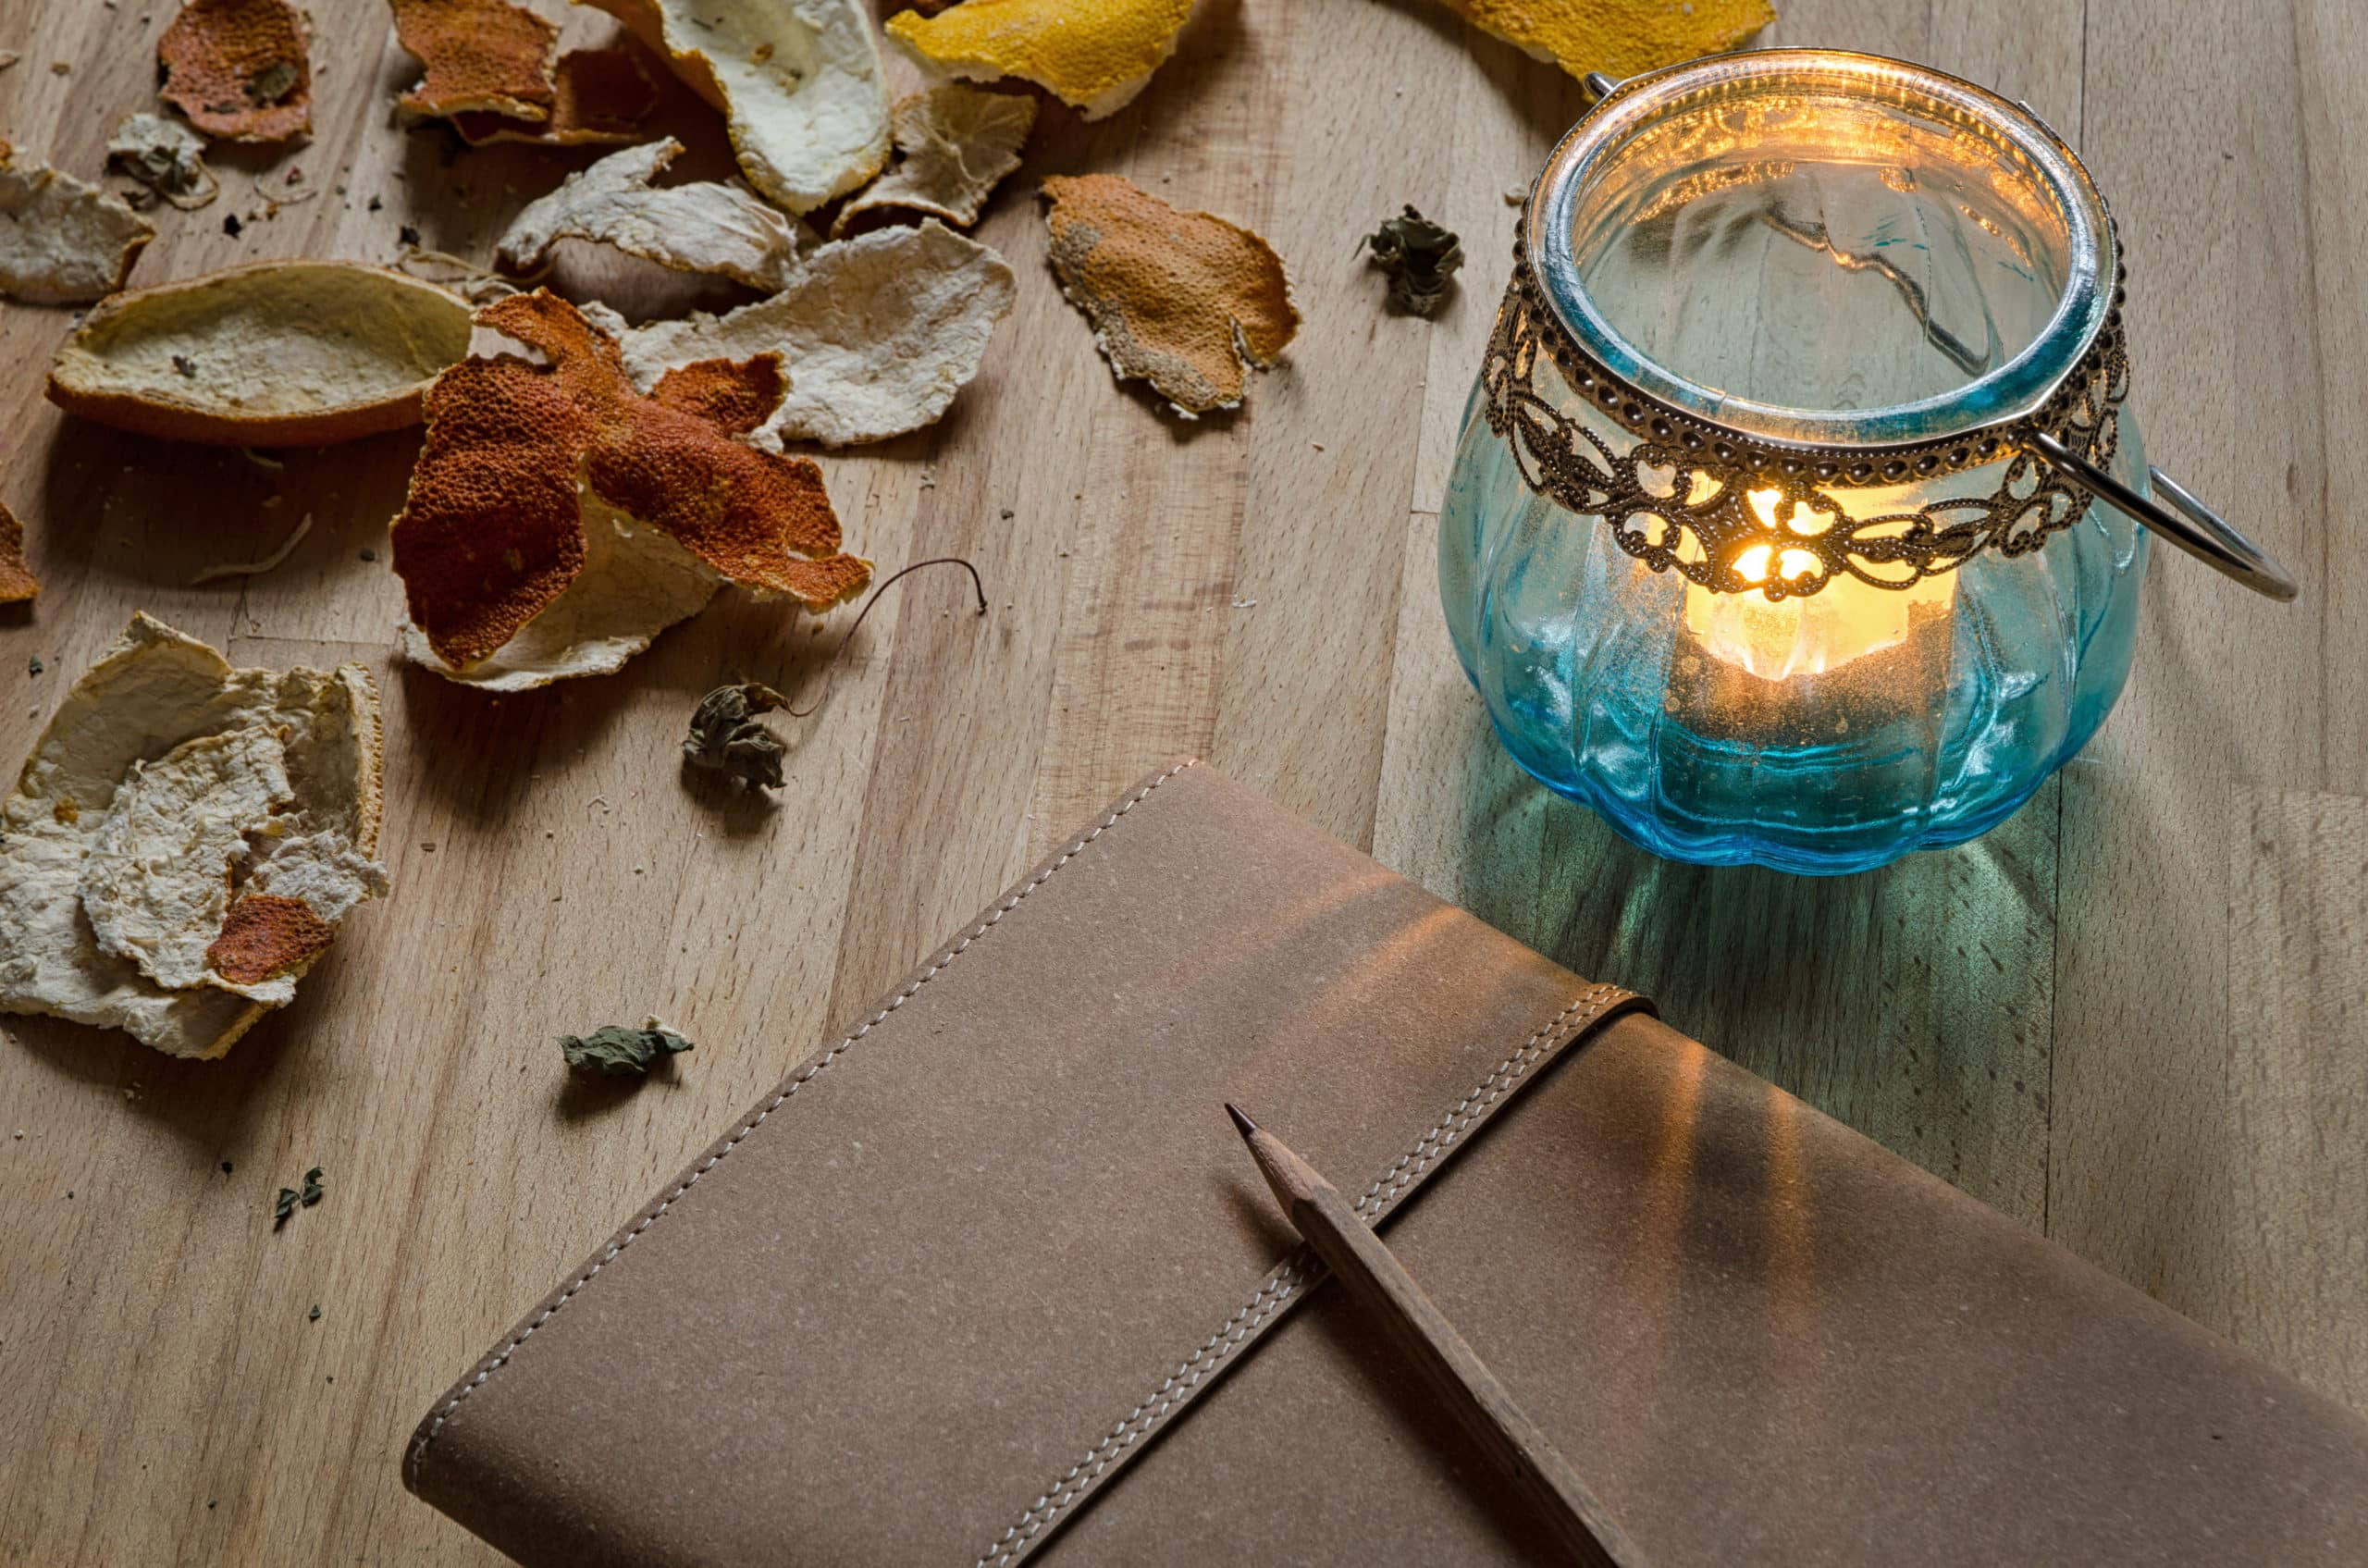 Vintage notebook, pencil, and candle lantern with dried leaves on wooden table.